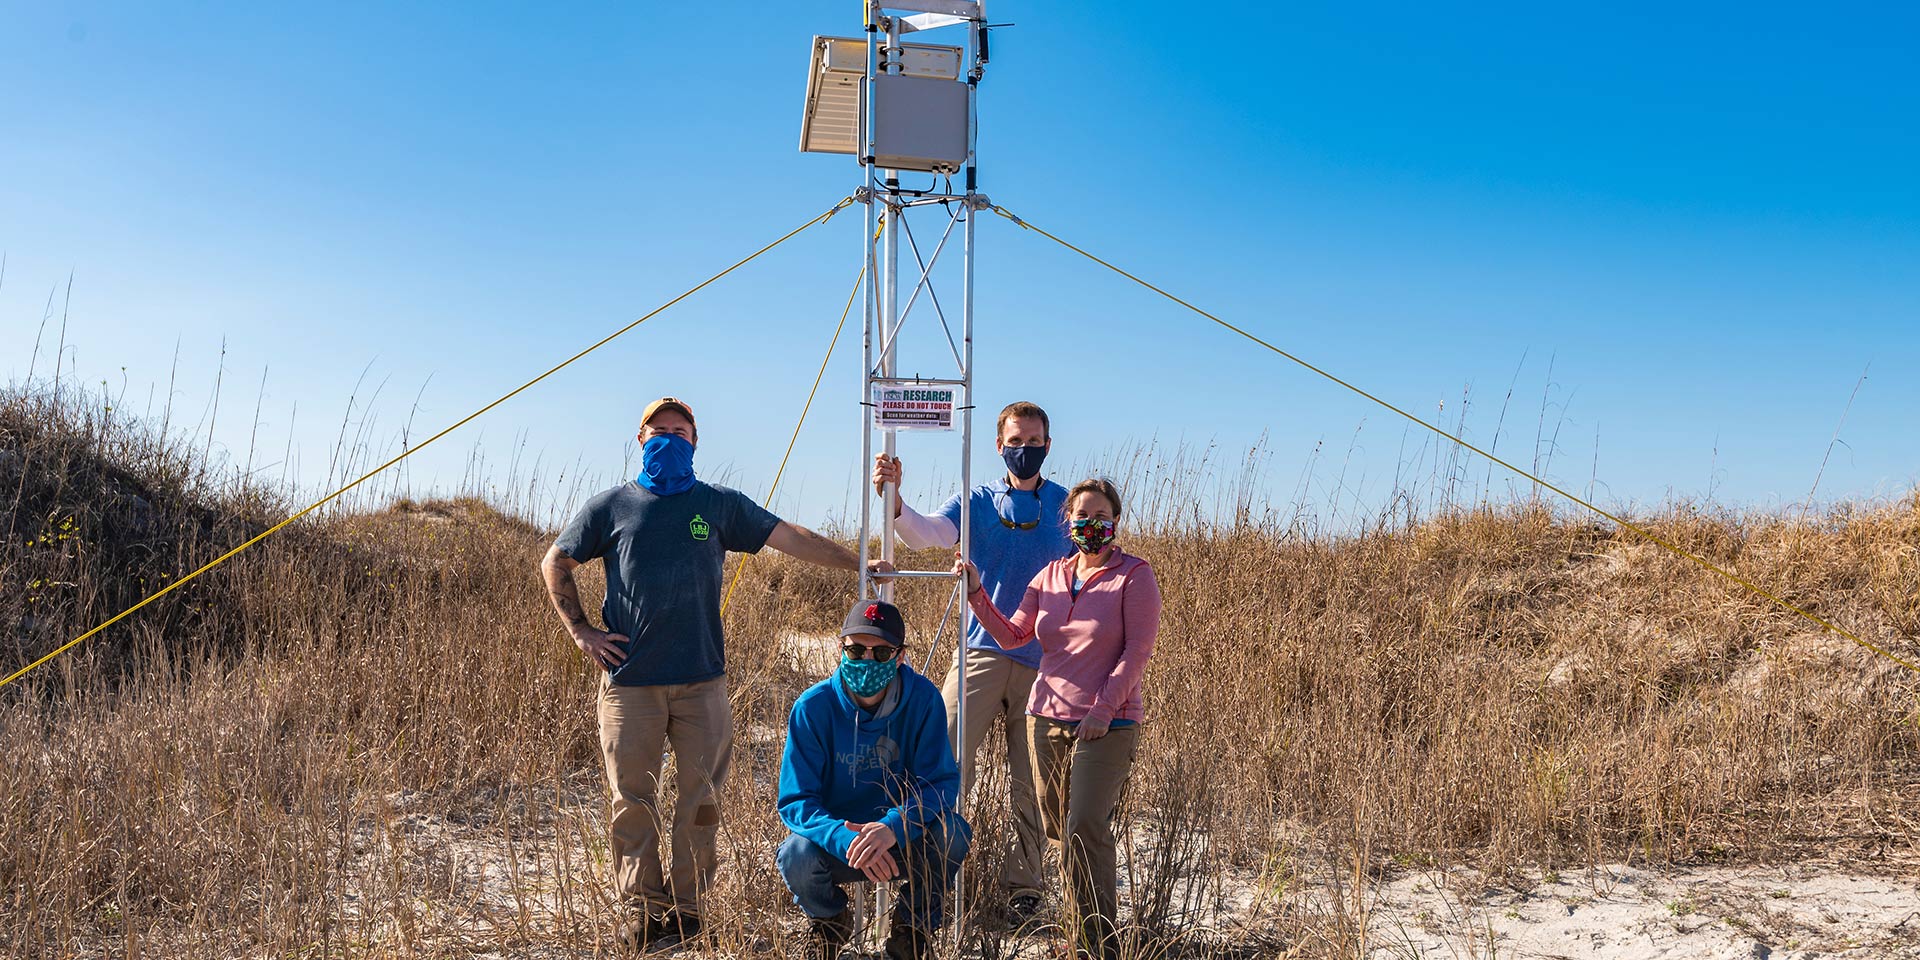 Four people stand next to a weather data tower on a dune